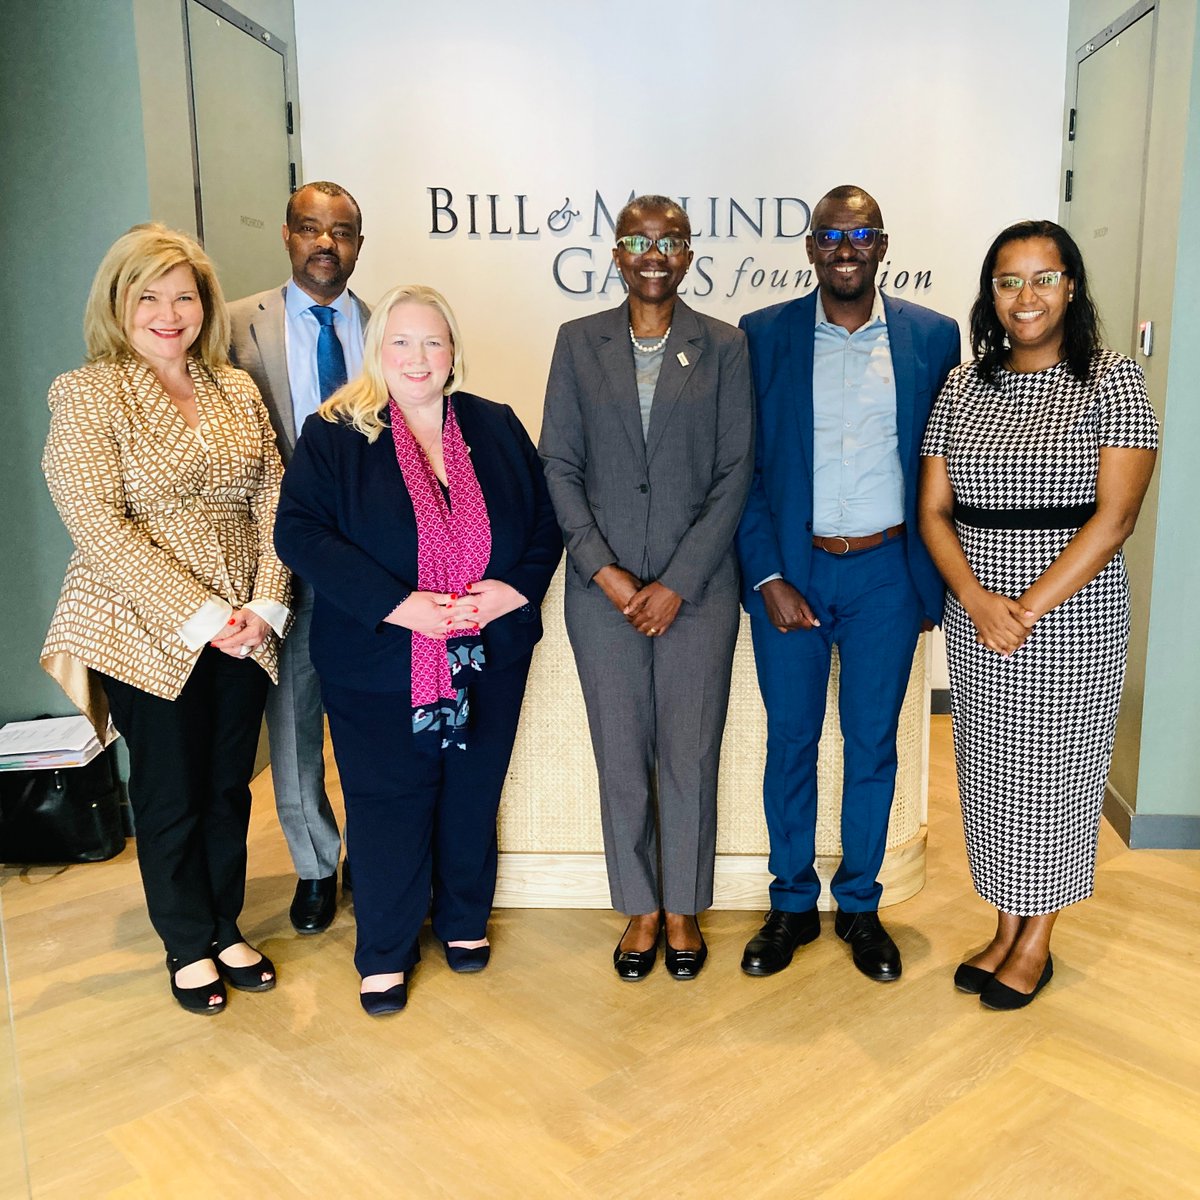 Grateful to have met with a valuable USAID partner, @GatesFoundation, as we discussed digital transformation, pharmaceutical manufacturing & partnerships to catalyze development in #Africa. 

Looking forward to our continued partnership in high priority areas! @pbasinga